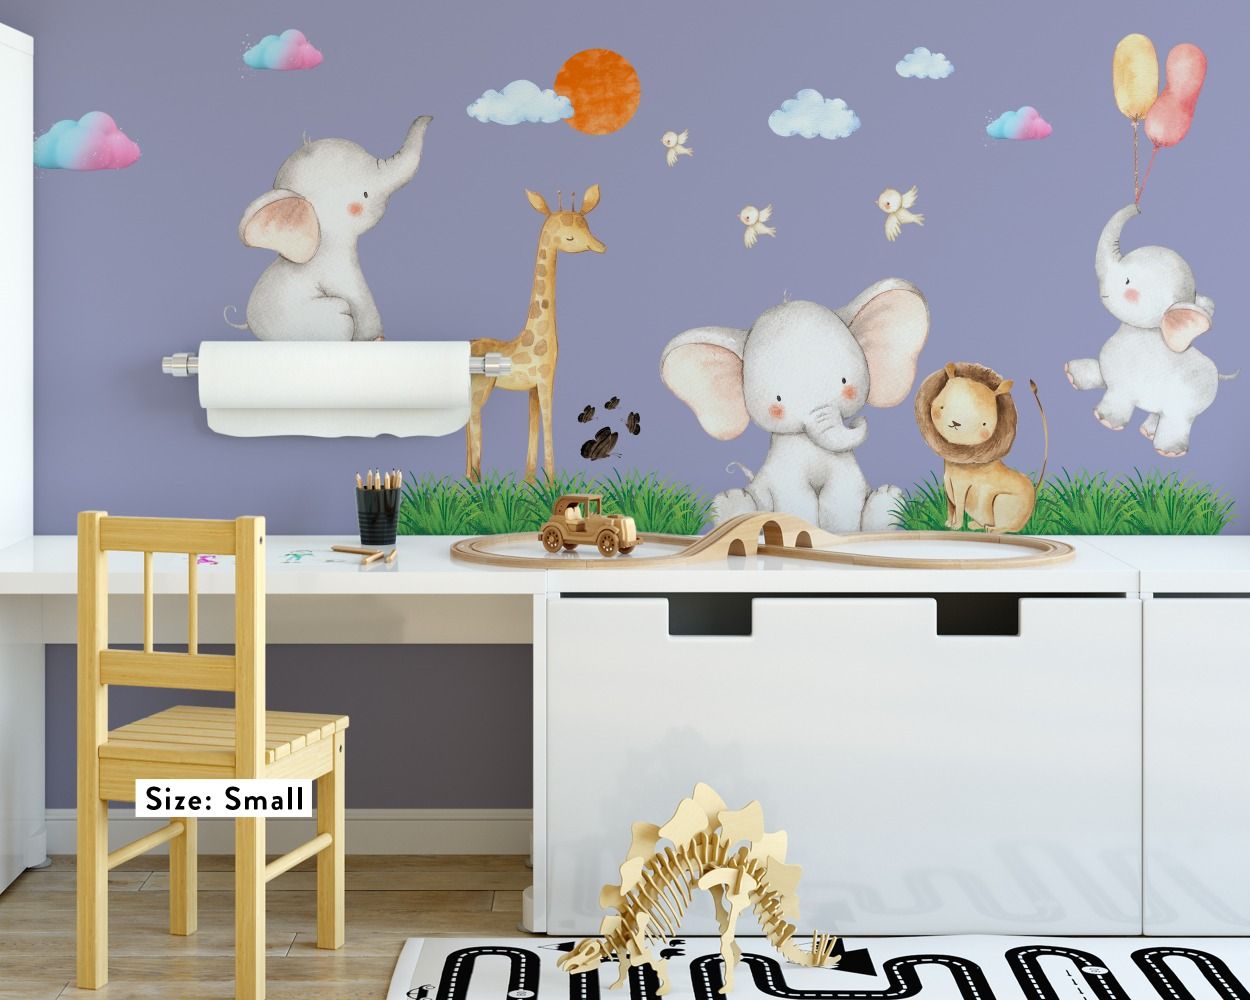 Kids Room Cute Animal Wall Stickers, Peel and Stick, Self Adhesive Wall  Decals, Nursery Room Decoration, Nursery Watercolour Animal Decals